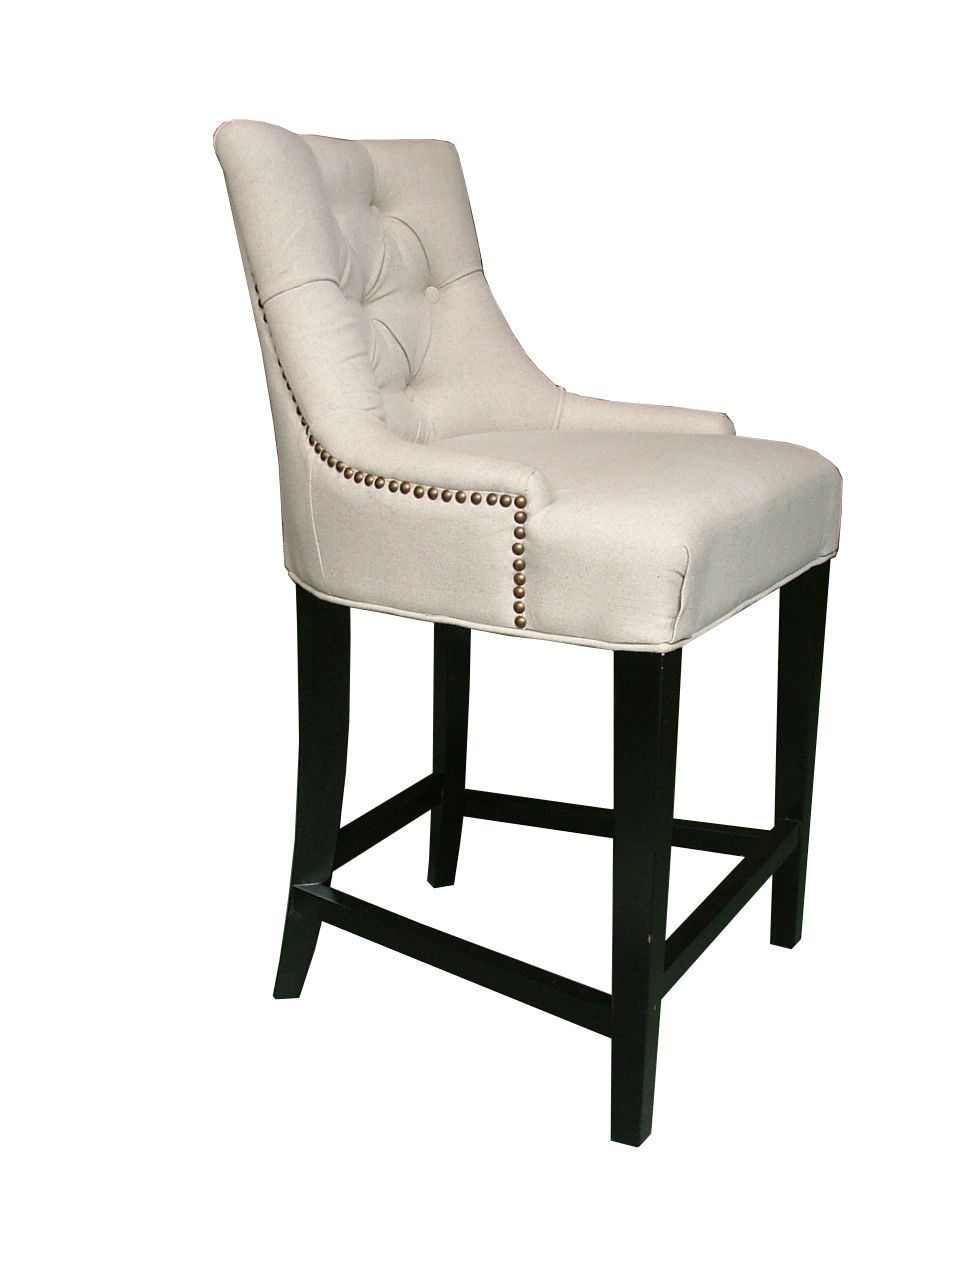 Luxury counter stools with backs also white tufted leather headboard